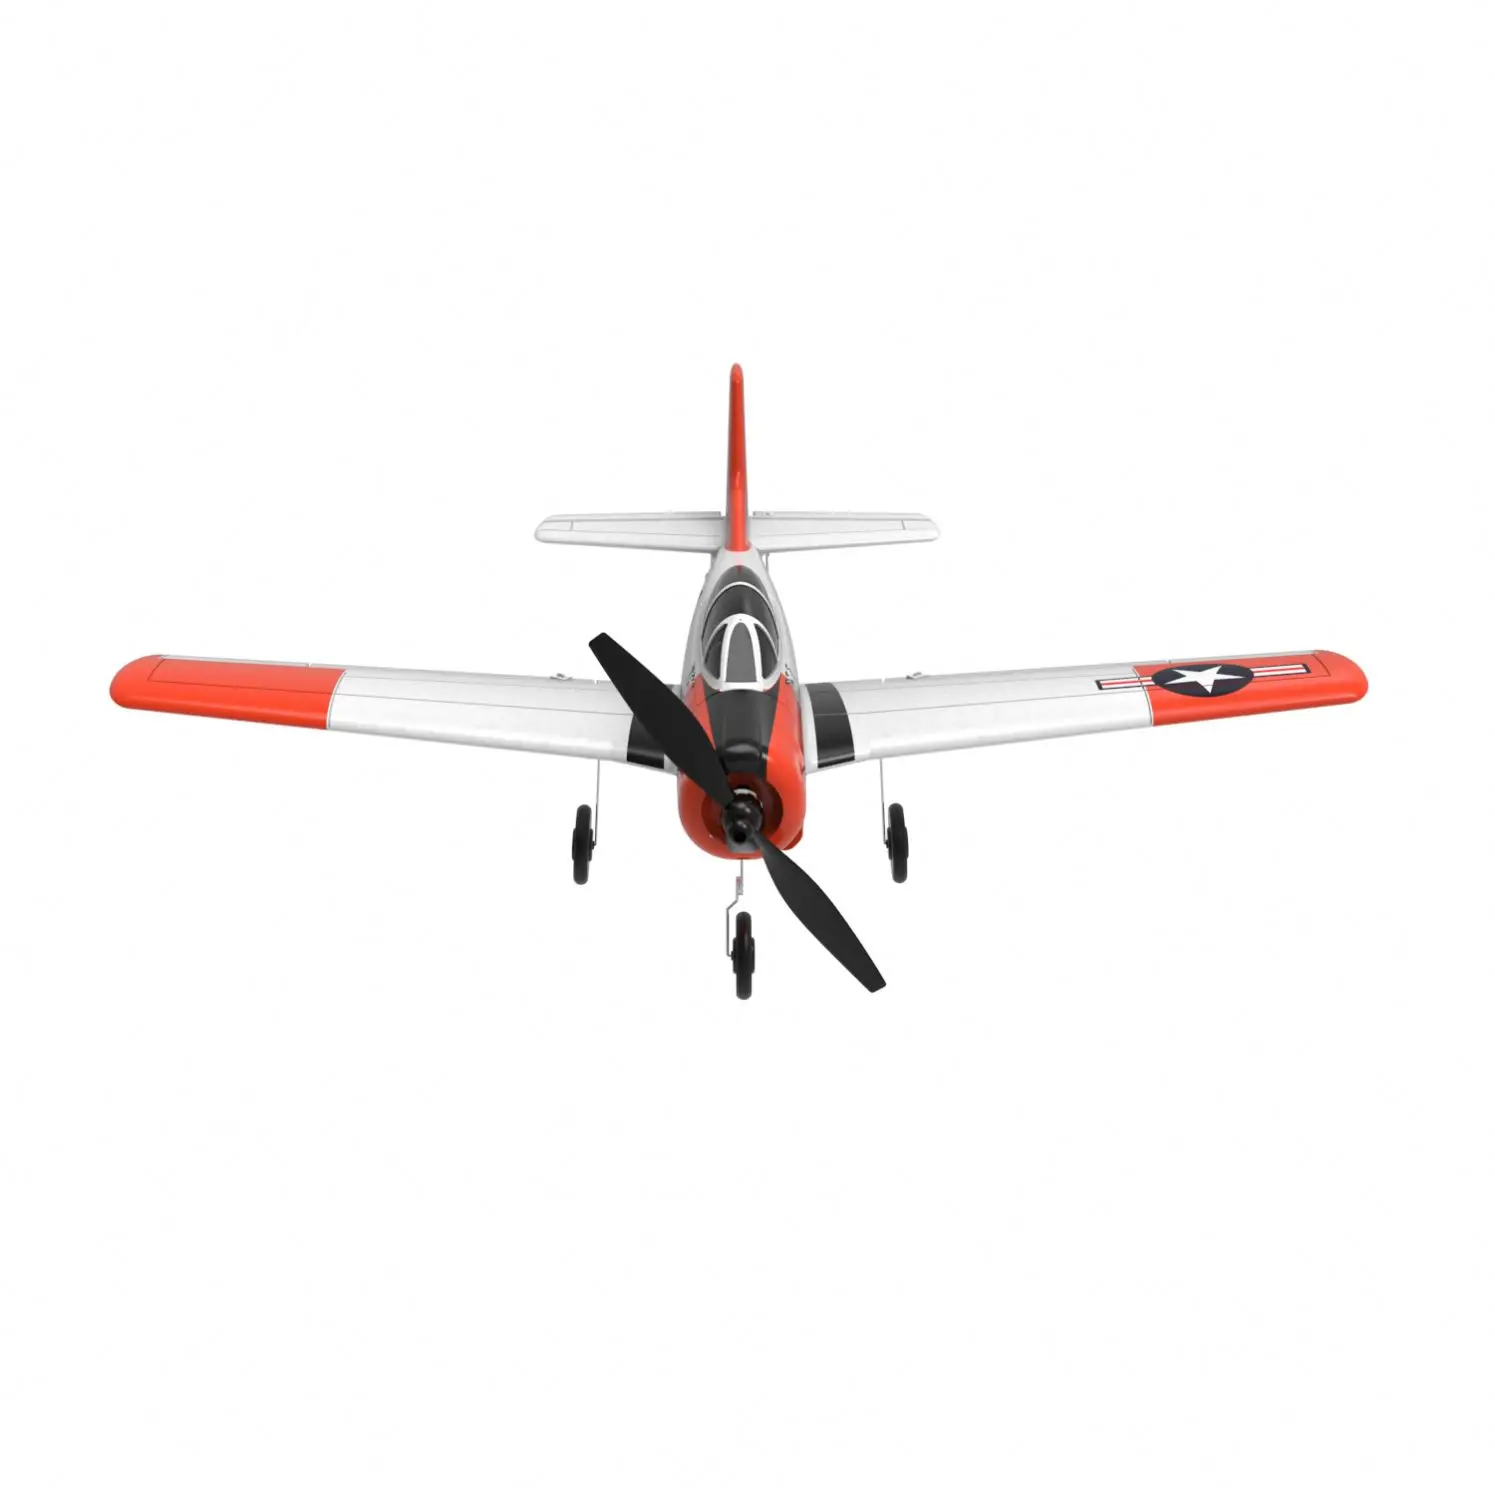 

Free Delivery T28 TROJAN 400mm Wingspan Small RC Toy Airplane One-key Aerobatic 6-axis Stabilizer System